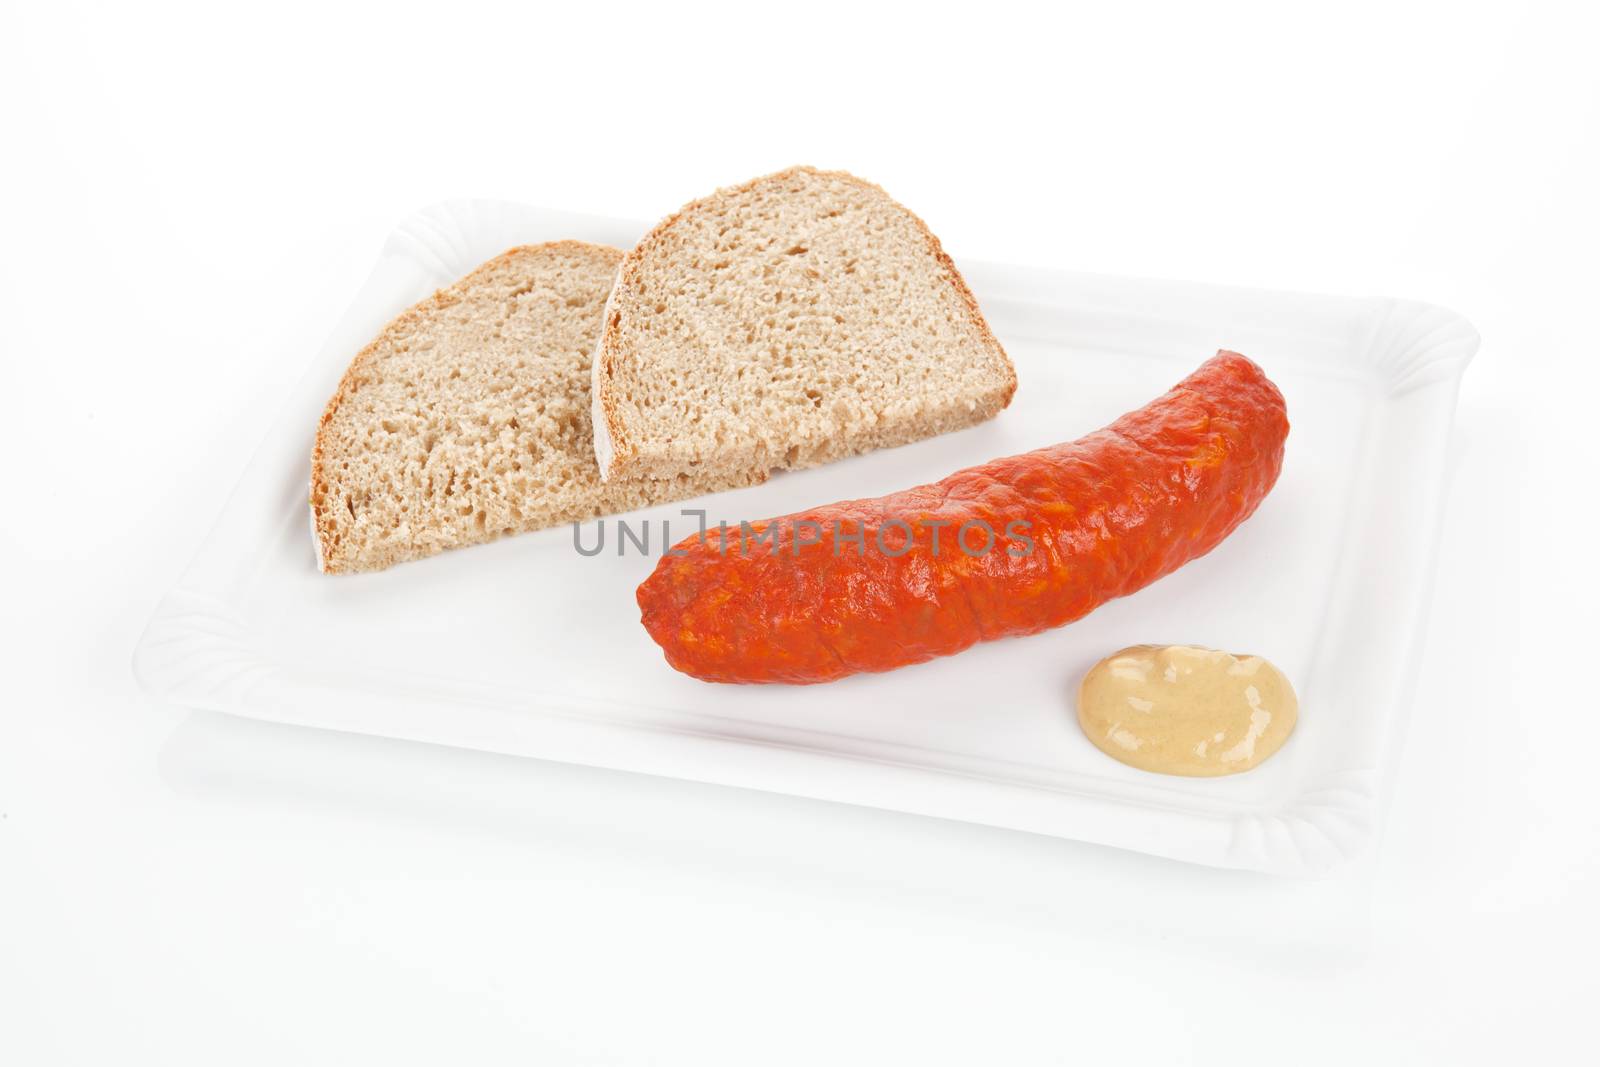 Delicious sausage with bread and mustard on white plate. Fast food concept.